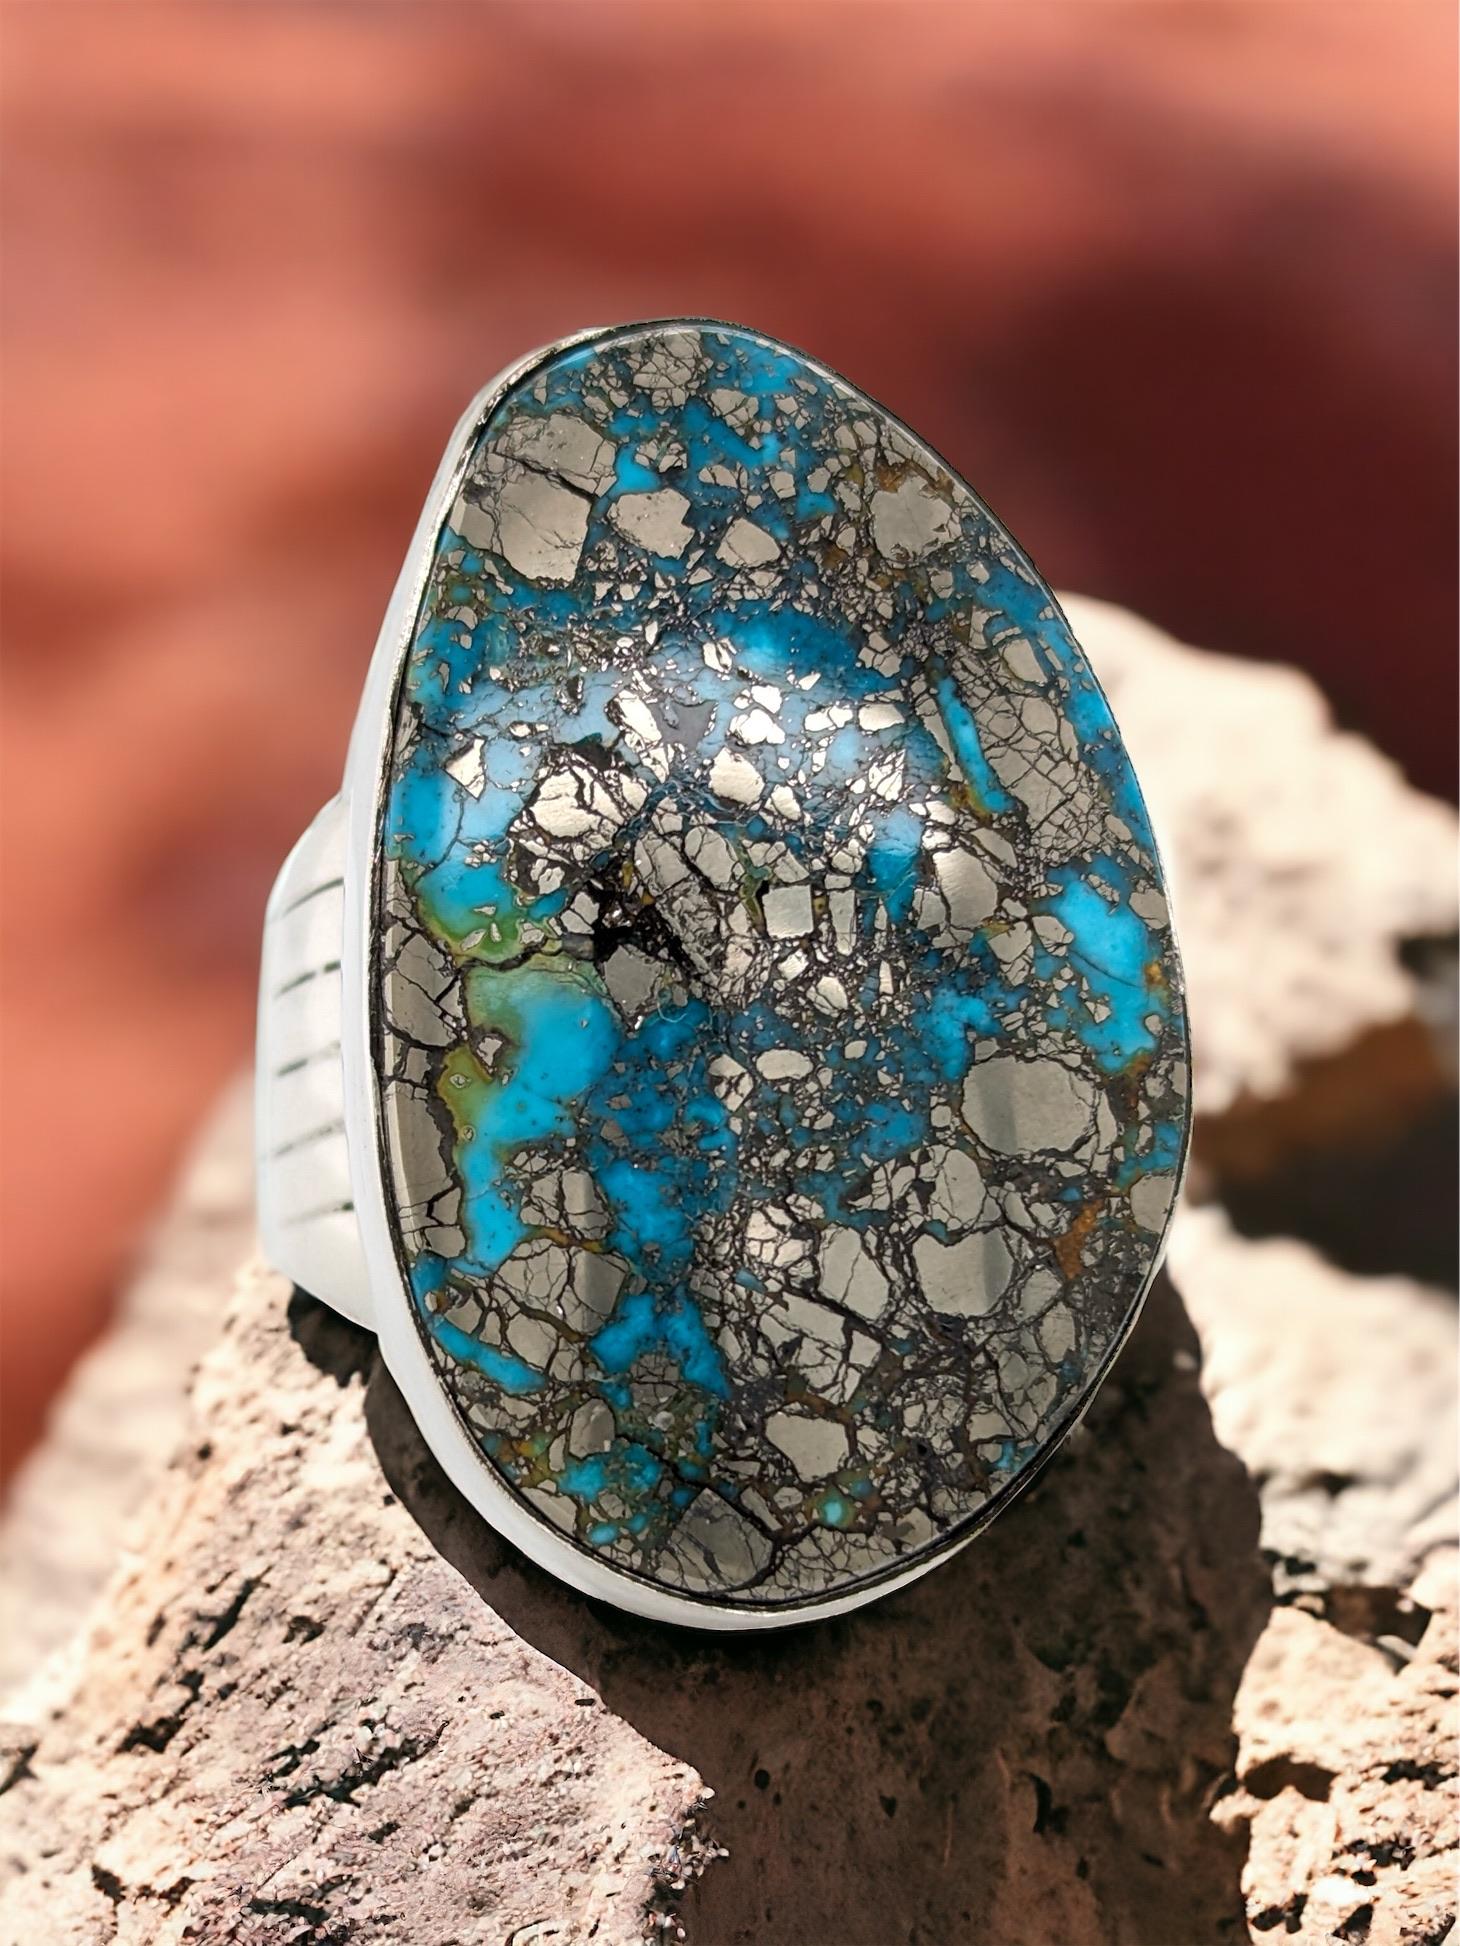 Embrace timeless elegance with this captivating Size 12 Sterling Silver Ring. Featuring a genuine American turquoise gemstone, this piece adds a touch of natural beauty to any outfit.

A Touch of Americana: The vibrant colors of the American